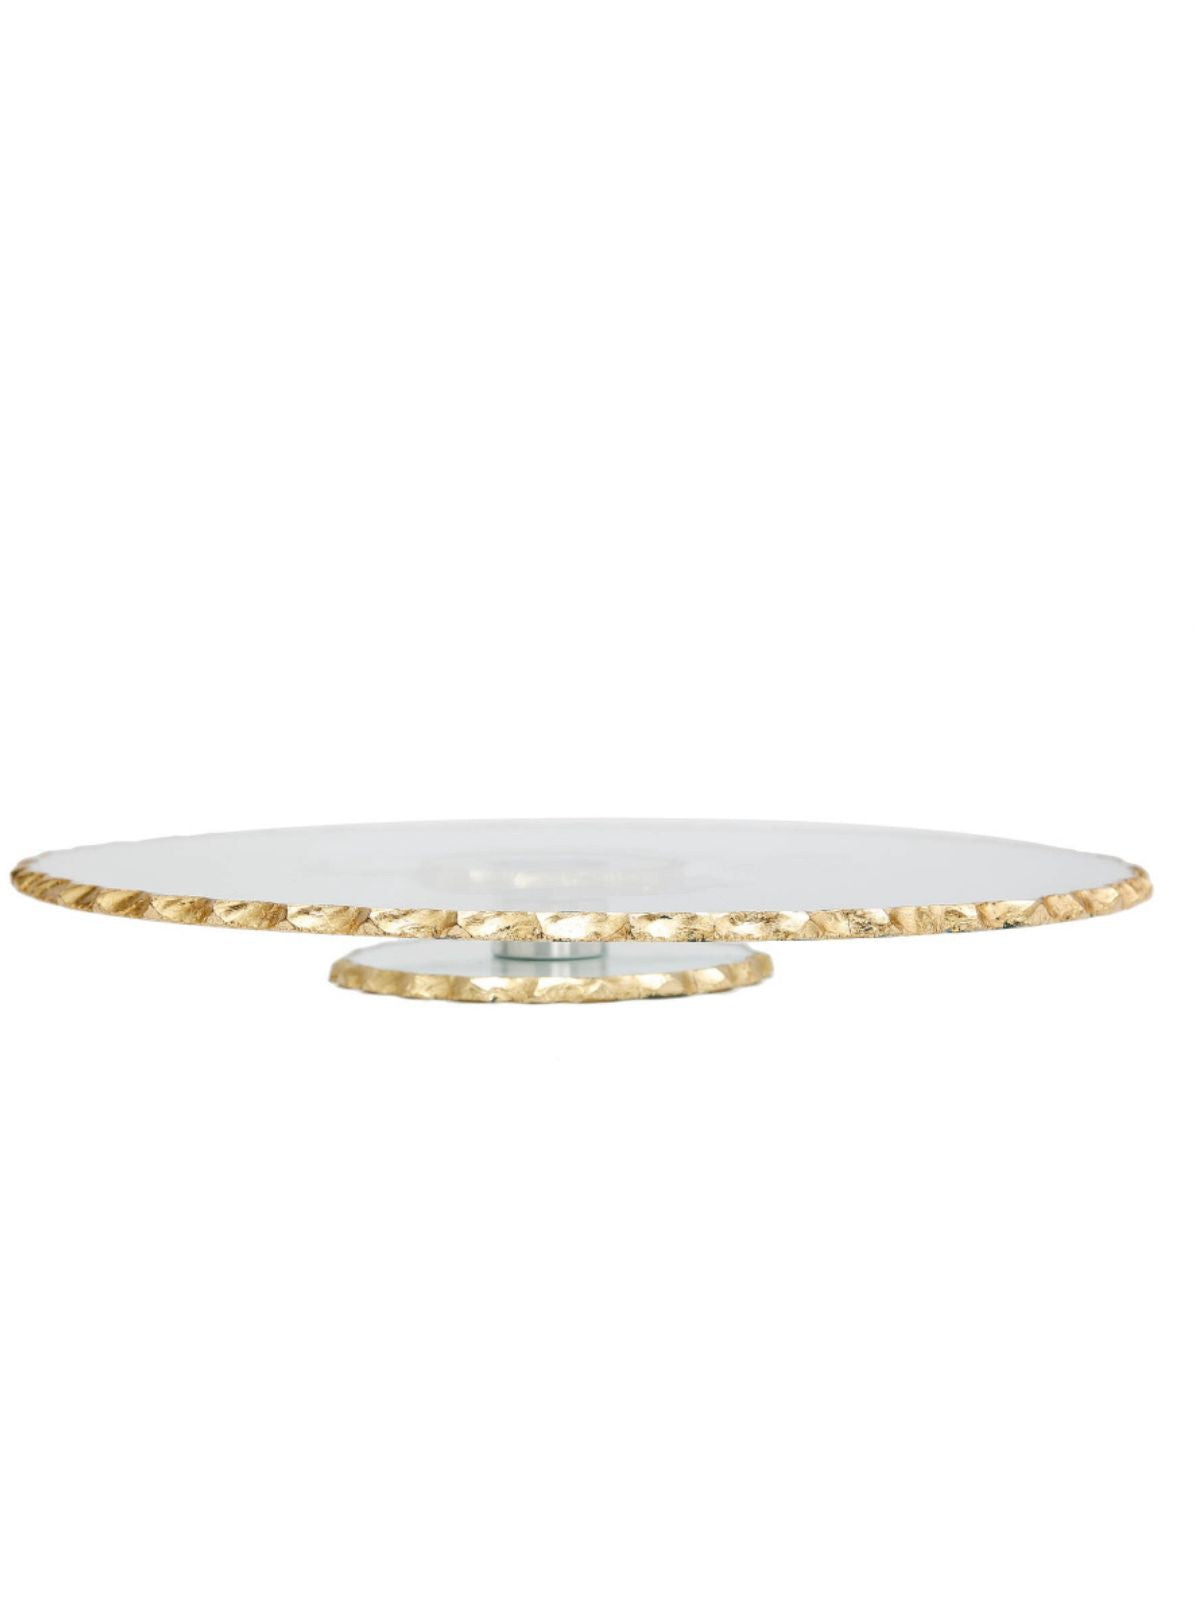 13.25D Lazy Susan Rotating Glass Cake Tray With Gold Edges sold by KYA Home Decor.